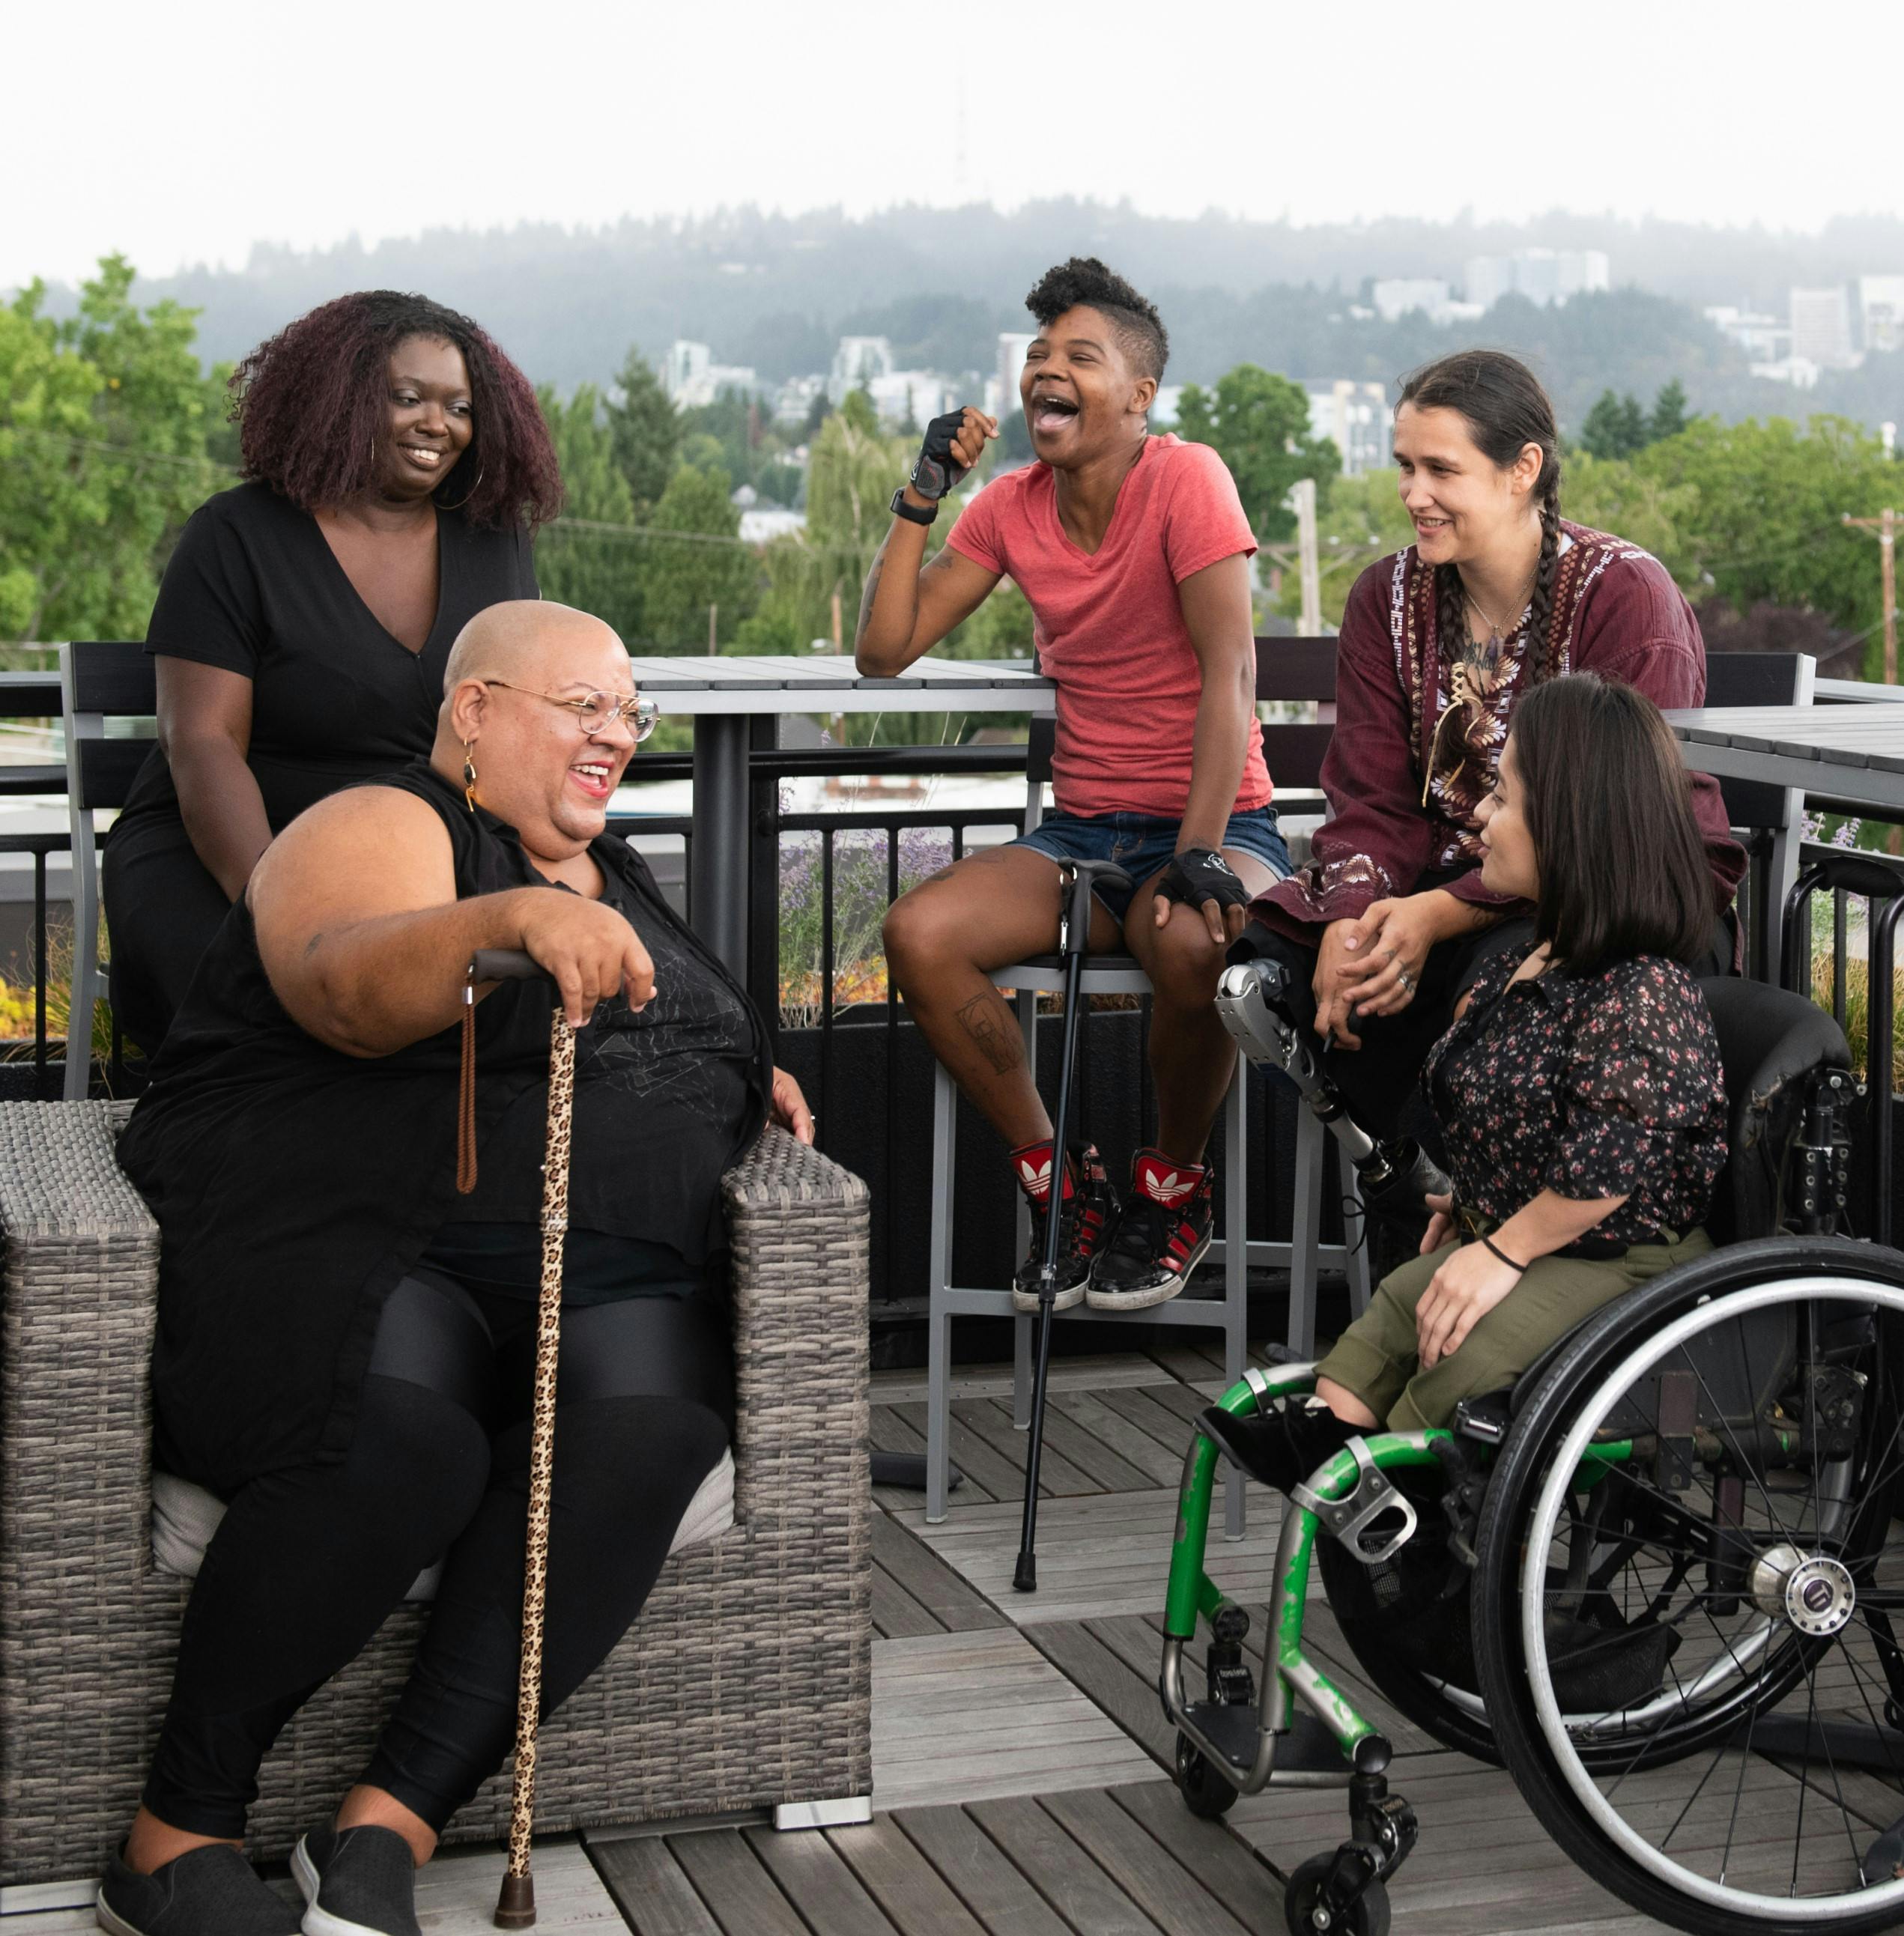 Five disabled people of color with canes, prosthetic legs, and a wheelchair sit on a rooftop deck,  laughing and sharing stories. Greenery and city high-rises are visible in the background. Photo attributed to Disabled and Here project.